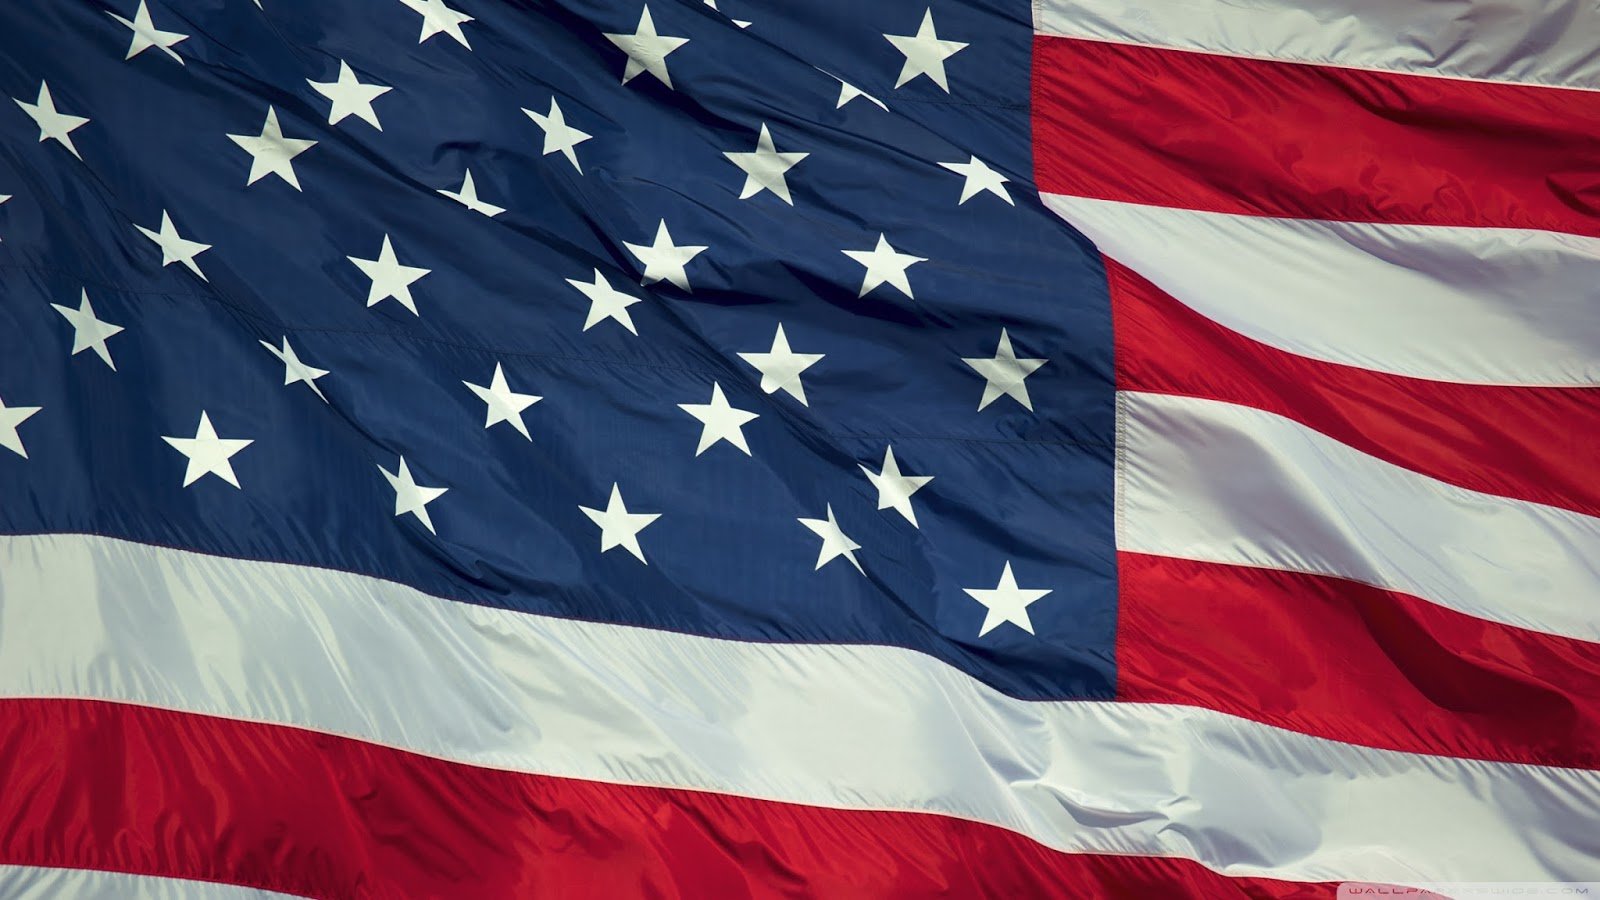 american flag hd wallpaper old american flag with black background 1600x900